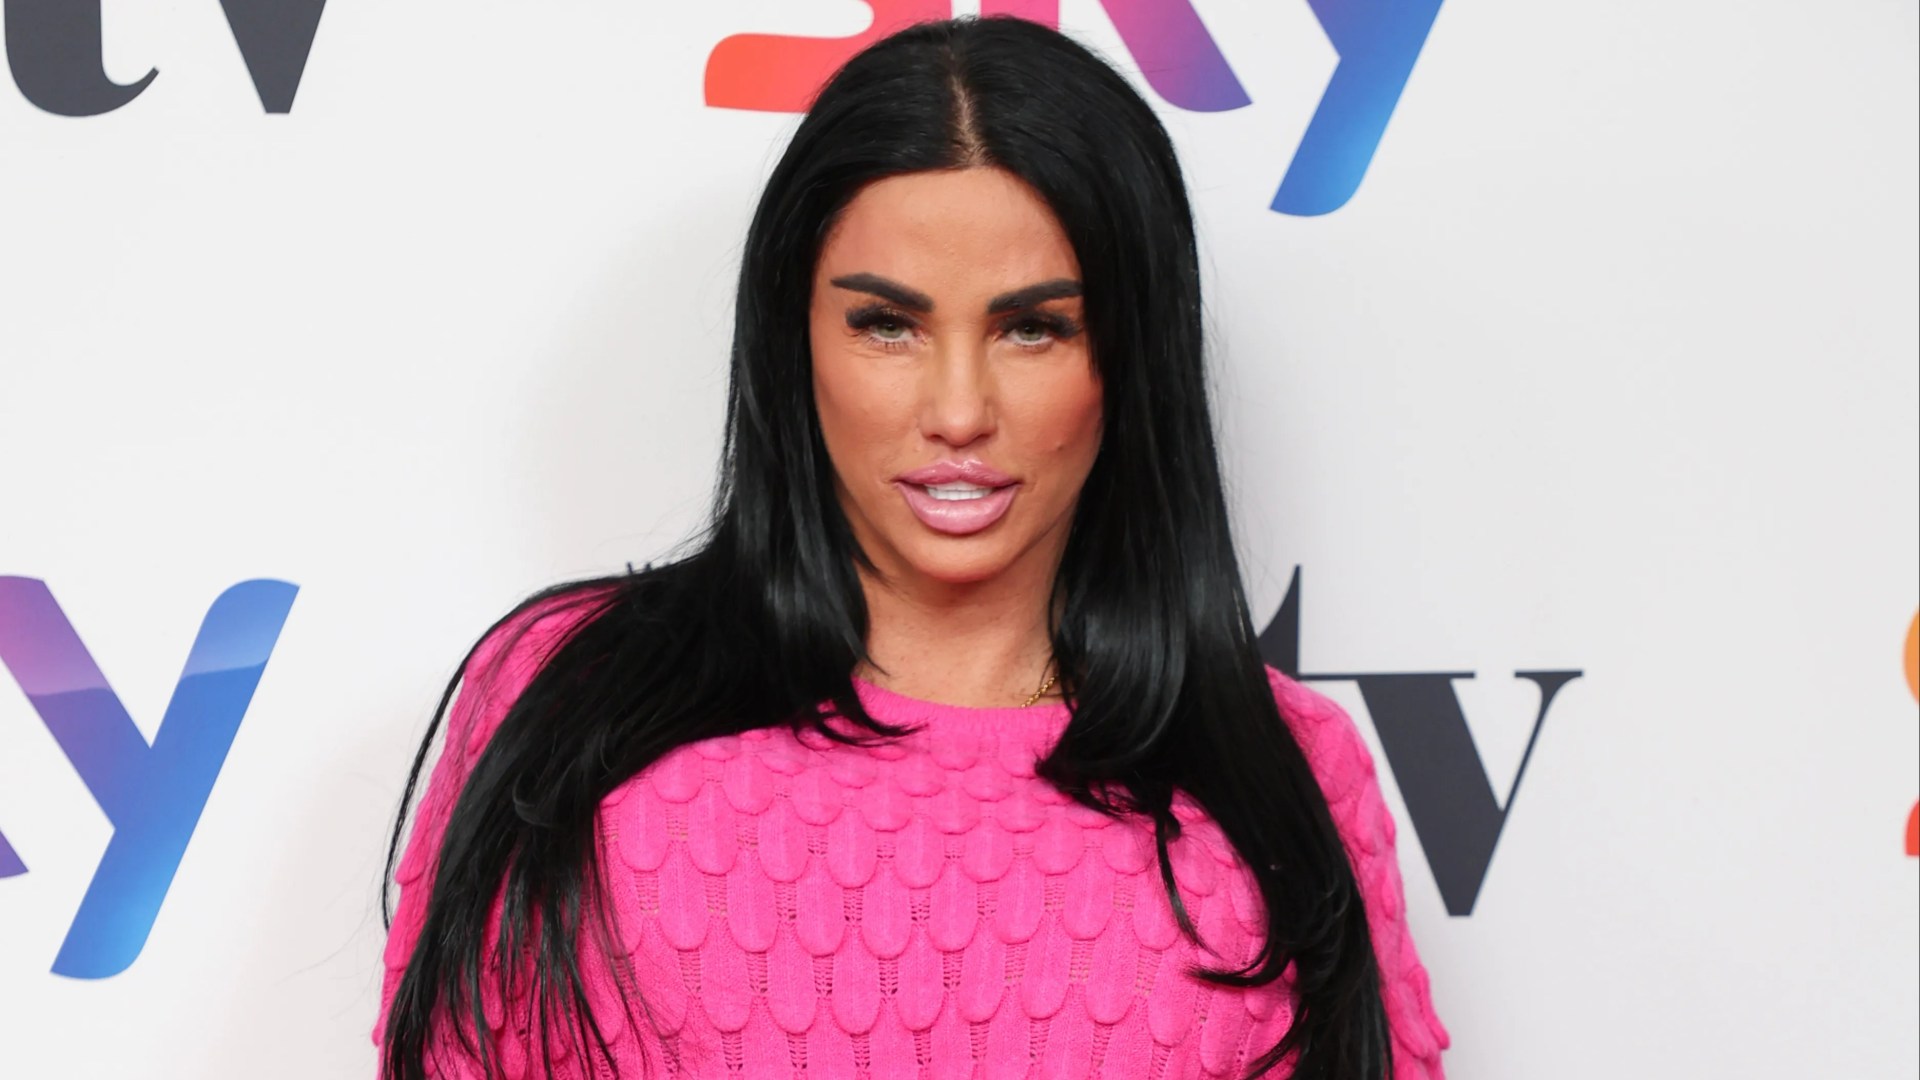 Katie Price’s Shocking £880 Fine for Driving While Banned – Court Snubbed!